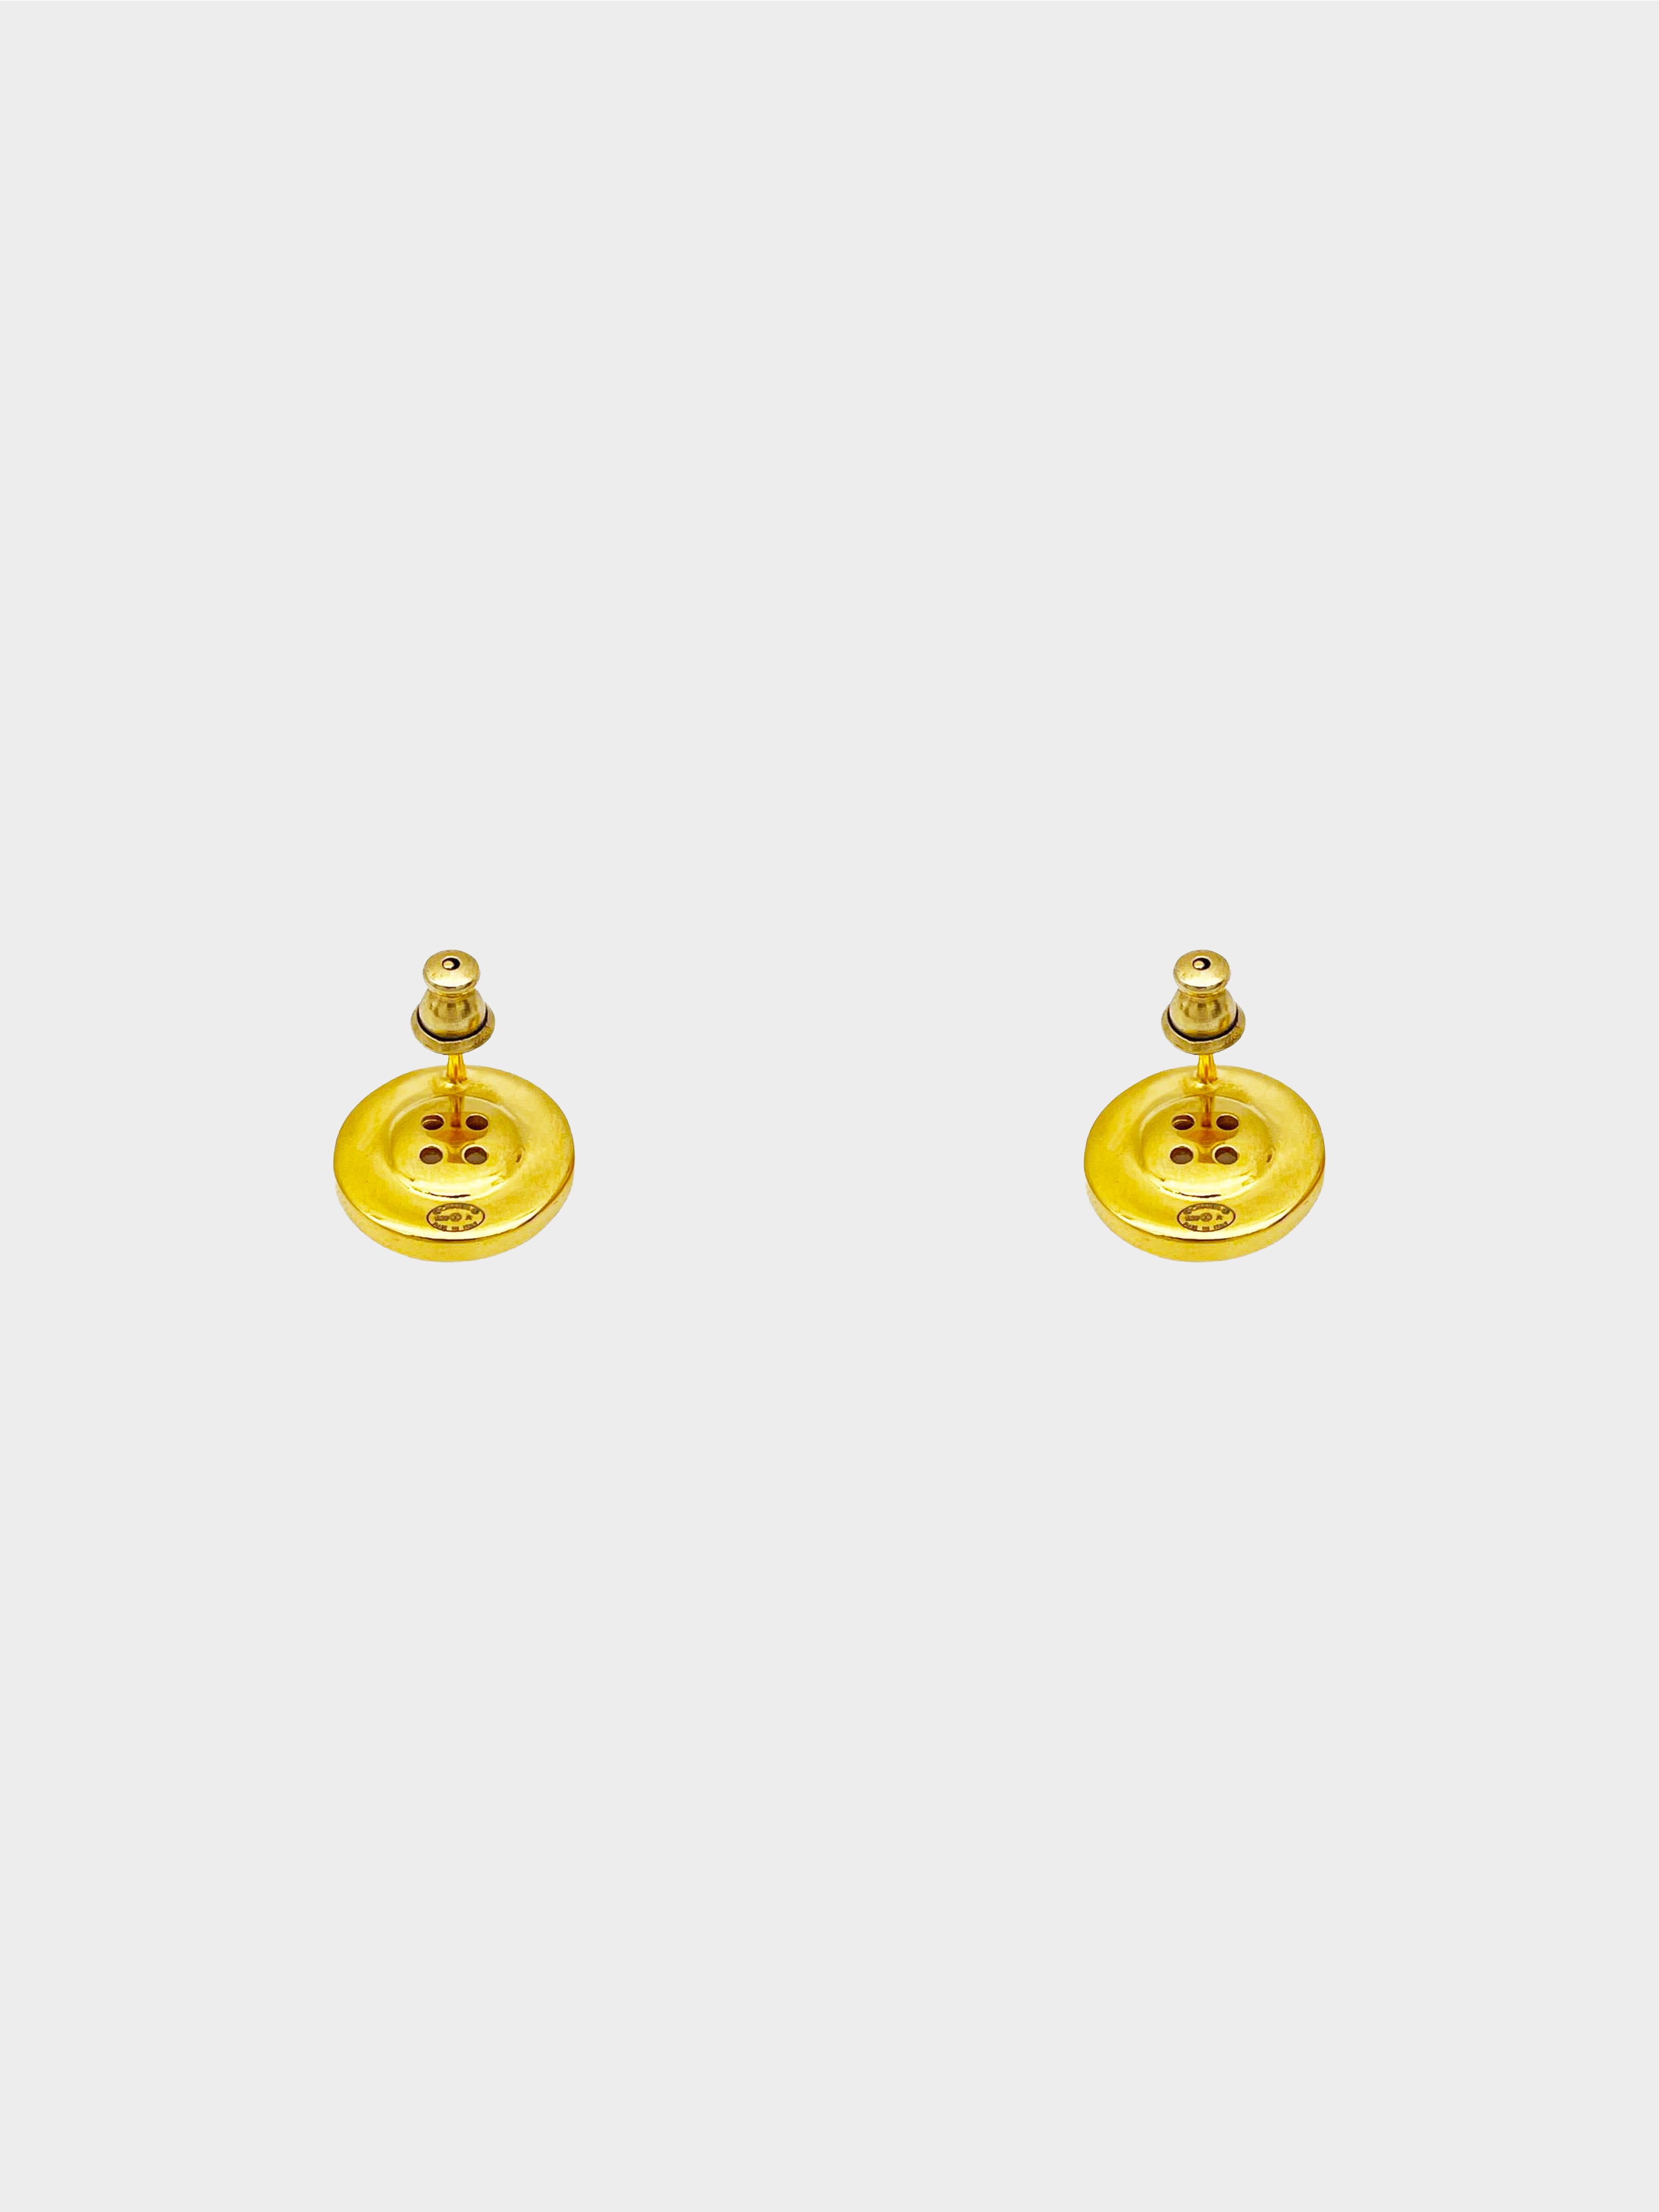 Chanel Fall 2020 Gold Chanel Paris Button Stud Earrings · INTO